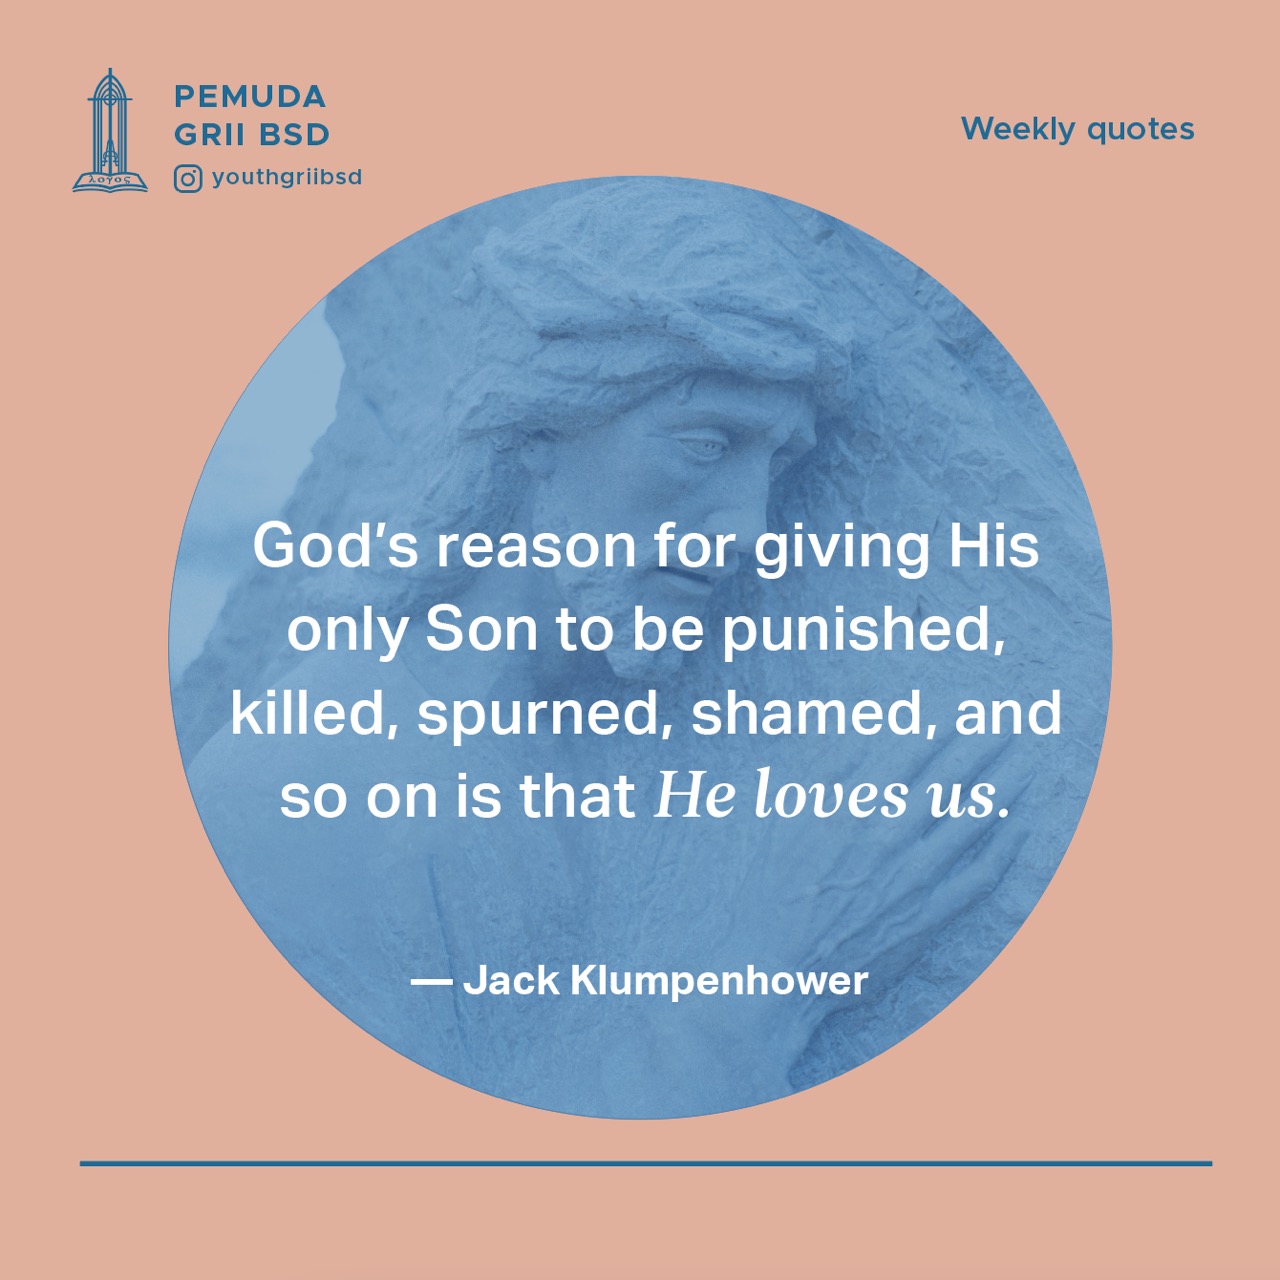 God's reason for giving His only Son to be punished, killed, spurned, shamed, and so on is that He loves us.